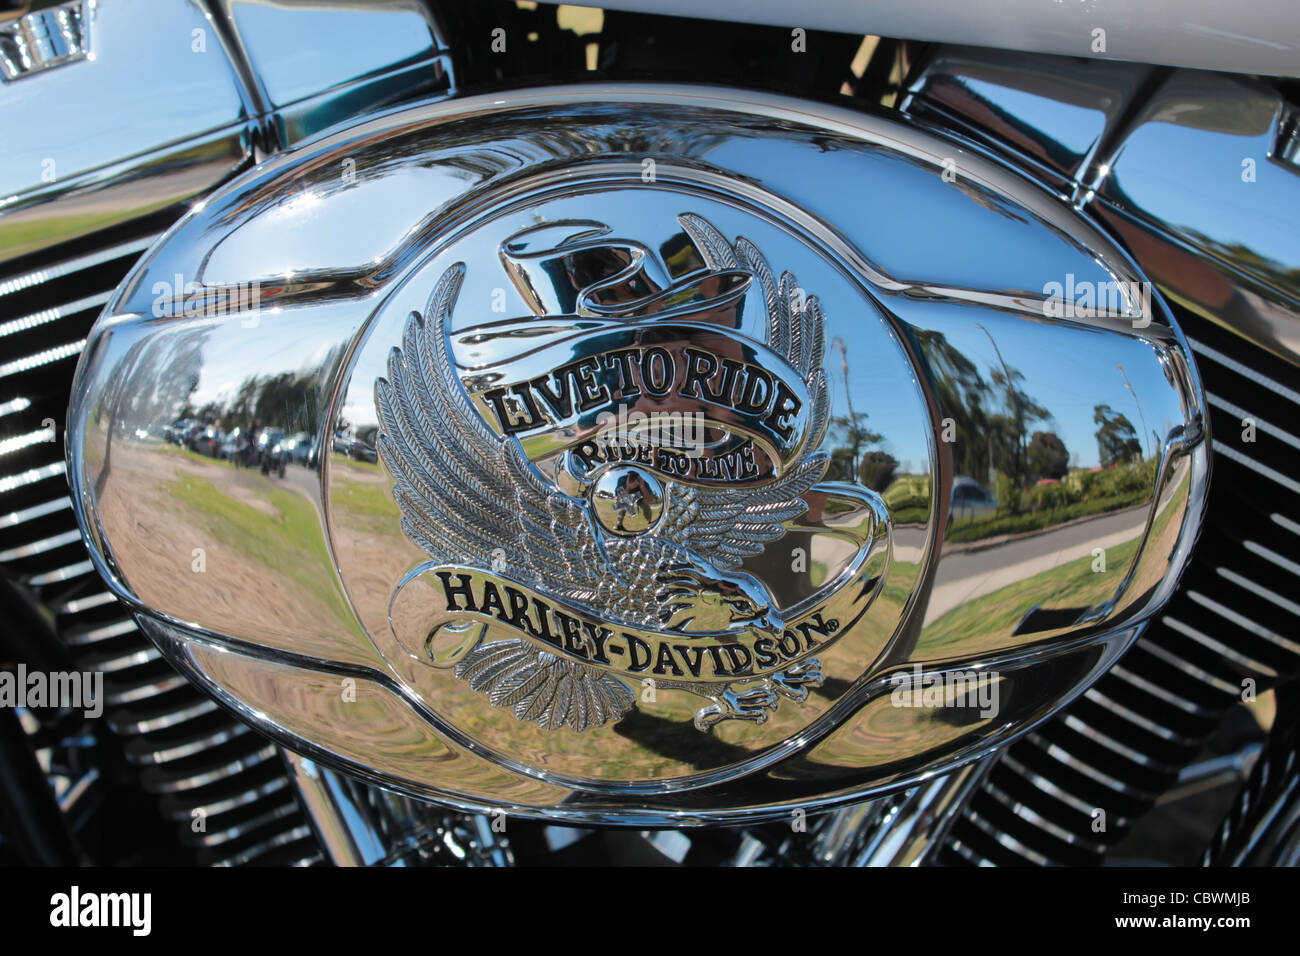 Harley Chrome, detail of reflections in engine Stock Photo